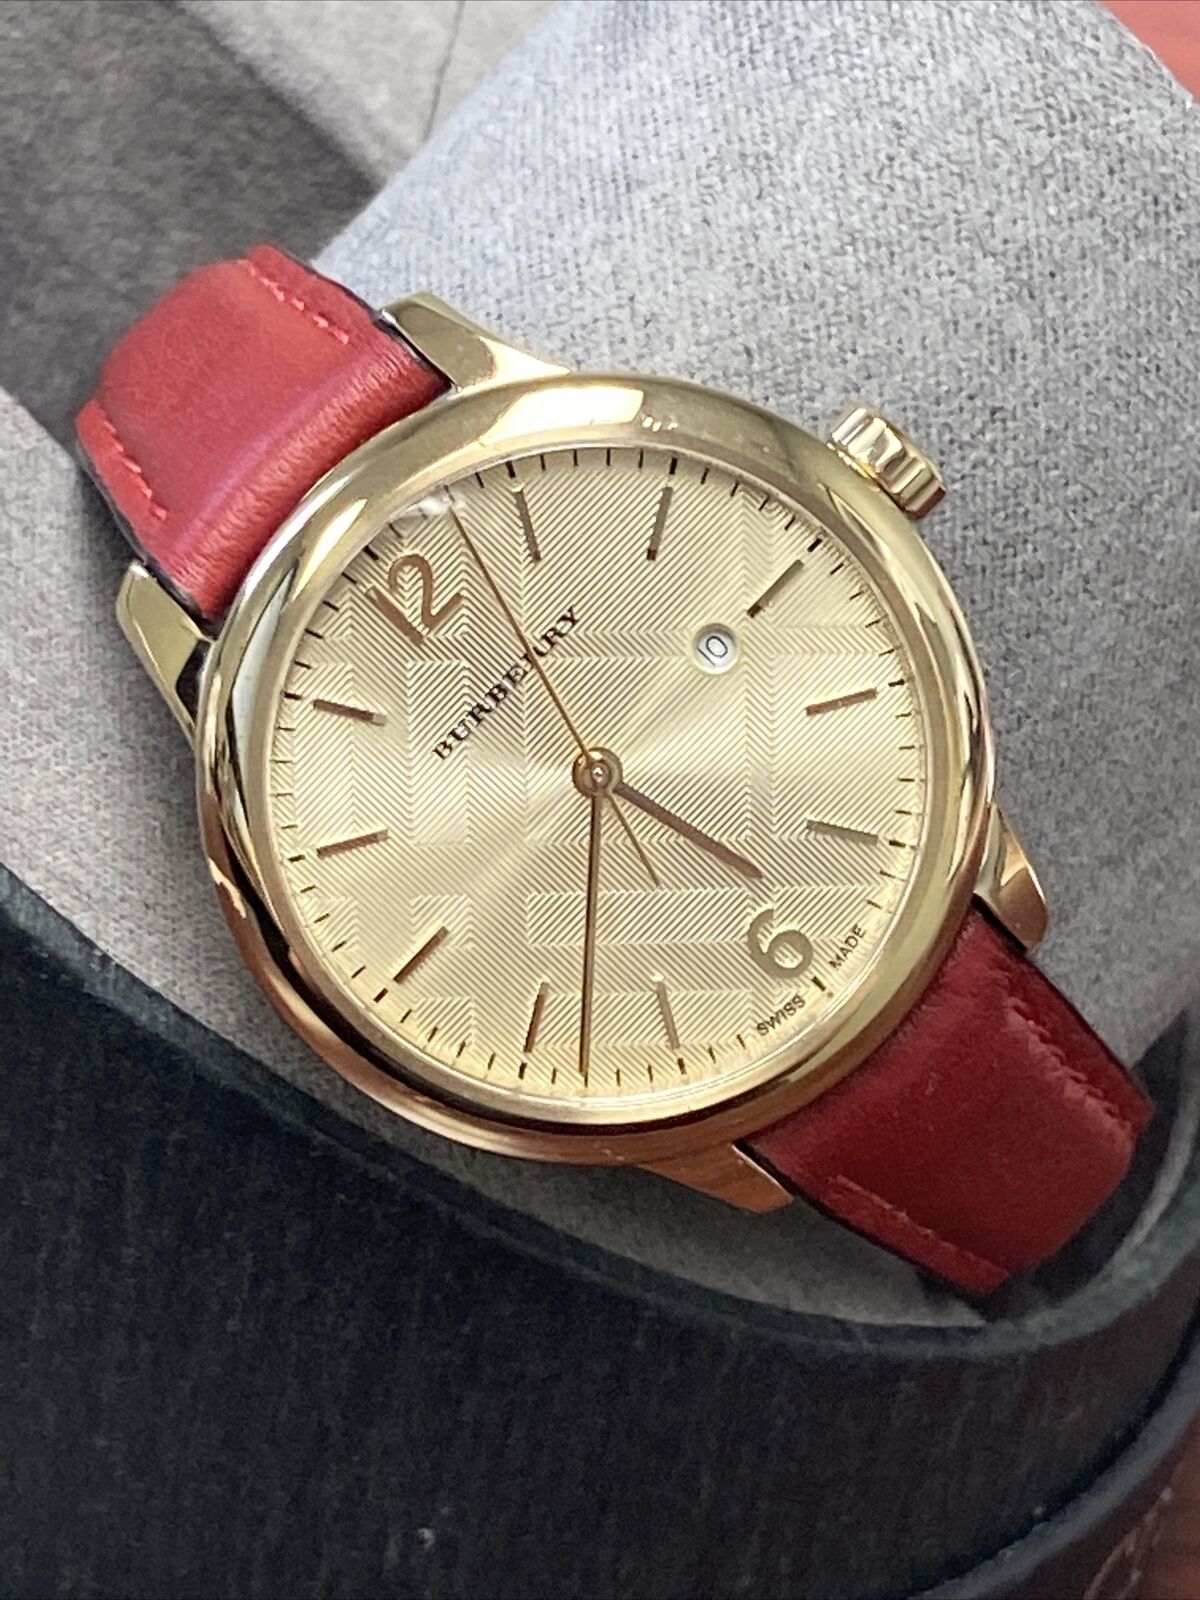 ĐỒNG HỒ NỮ DÂY DA BURBERRY THE CLASSIC ROUND RED LEATHER STRAP LADIES WATCH BU10102 7